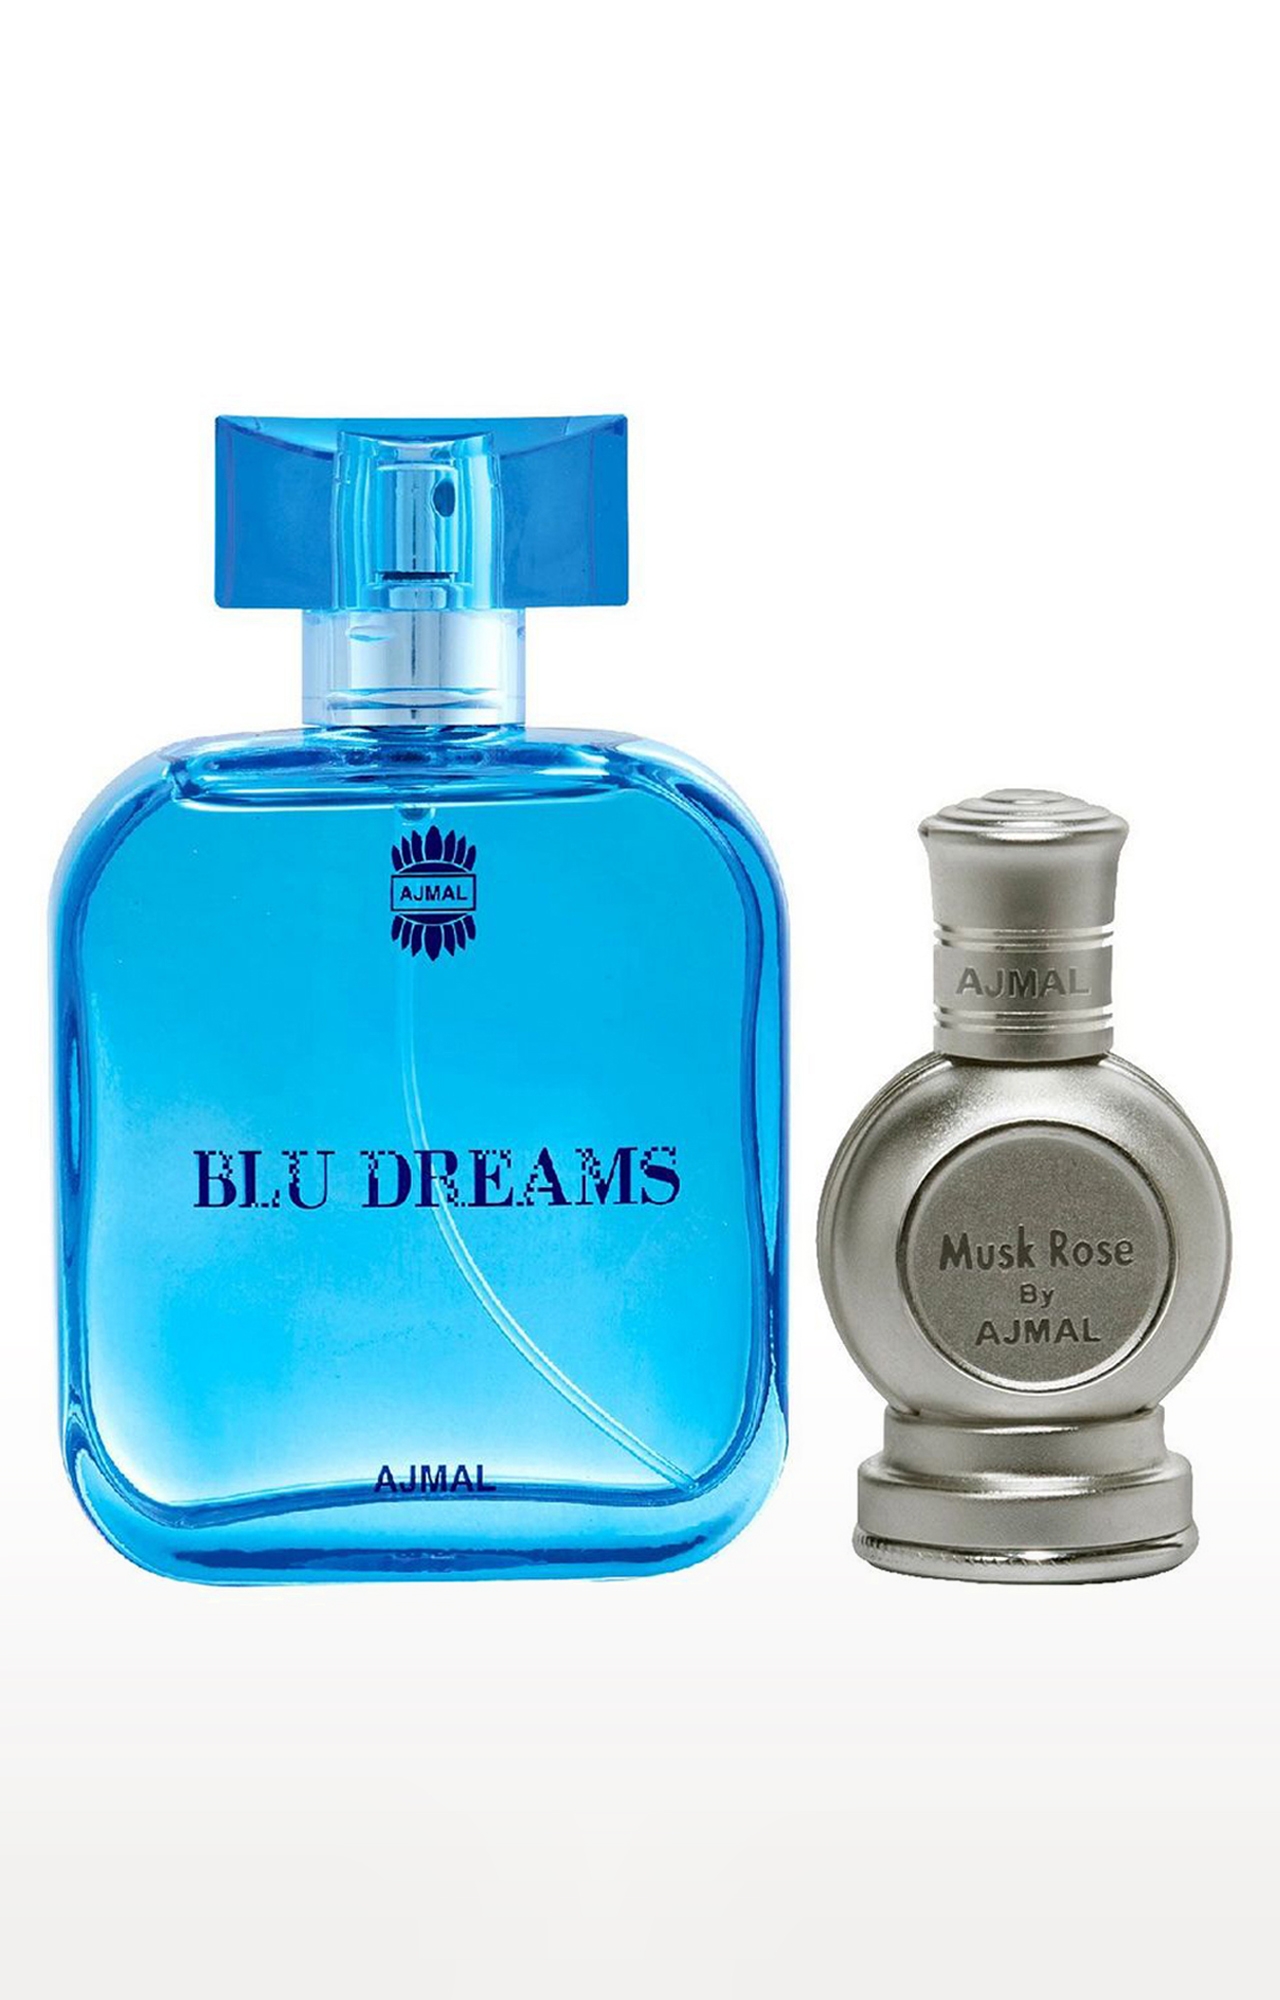 Ajmal | Ajmal Blu Dreams EDP Citurs Fruity Perfume 100ml for Men and Musk Rose Concentrated Perfume Oil Musky Alcohol-free Attar 12ml for Unisex